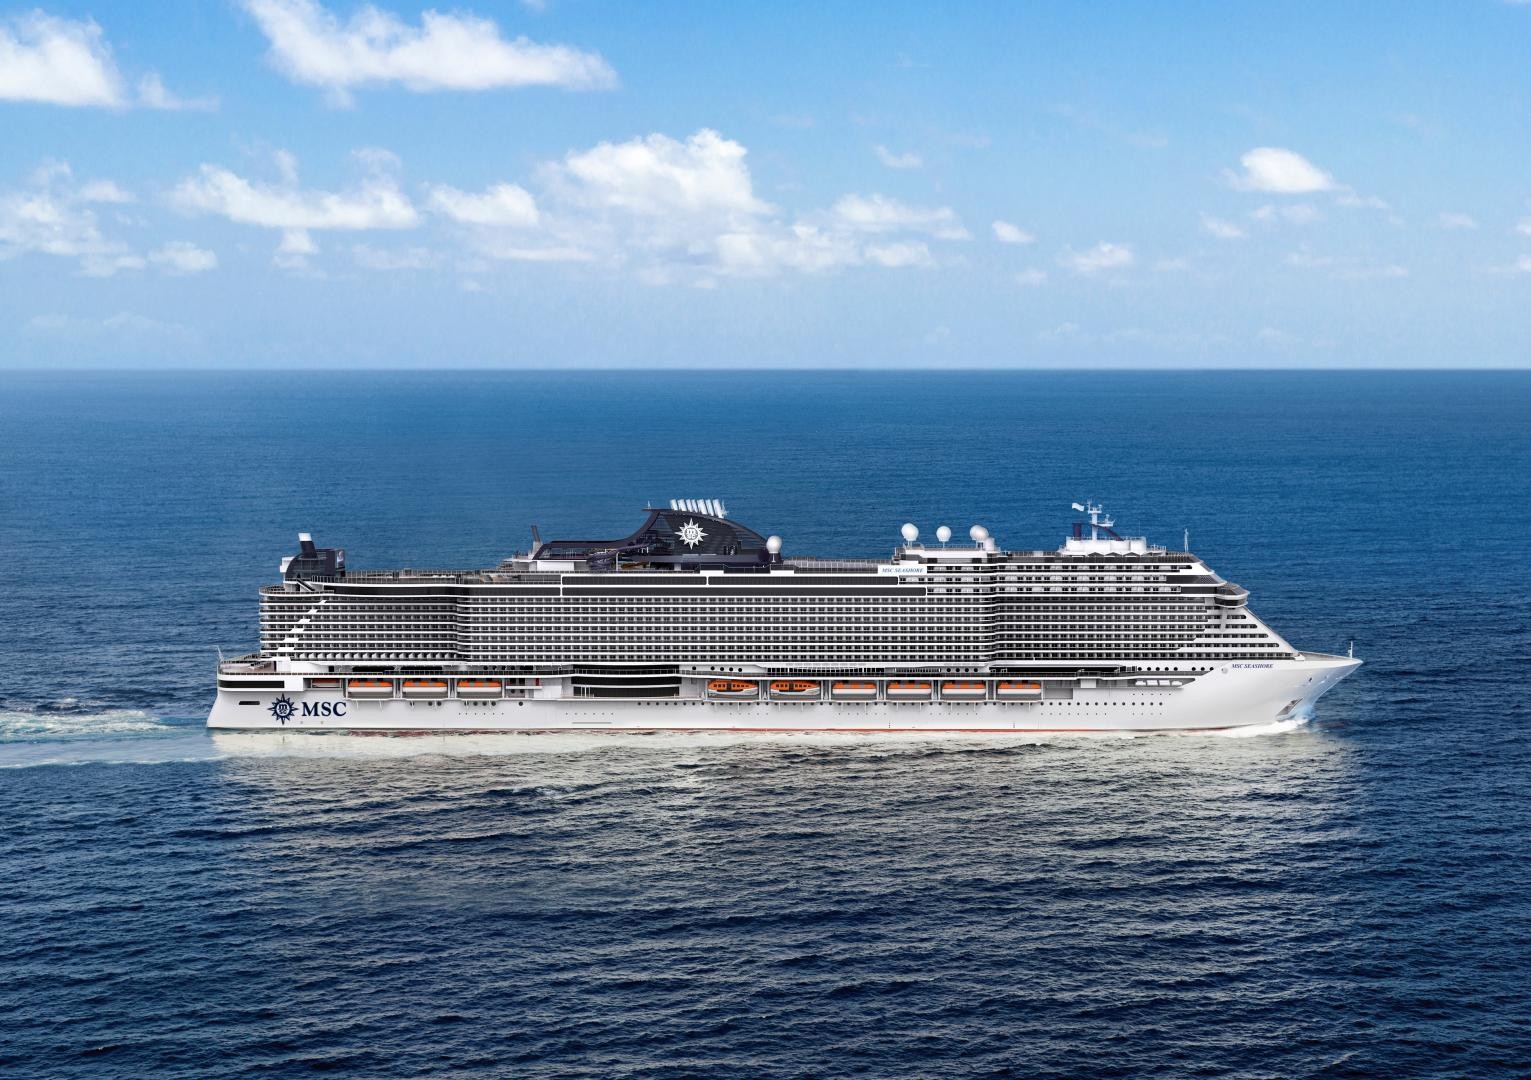 Msc Cruises to implement next-generation air sanitation system